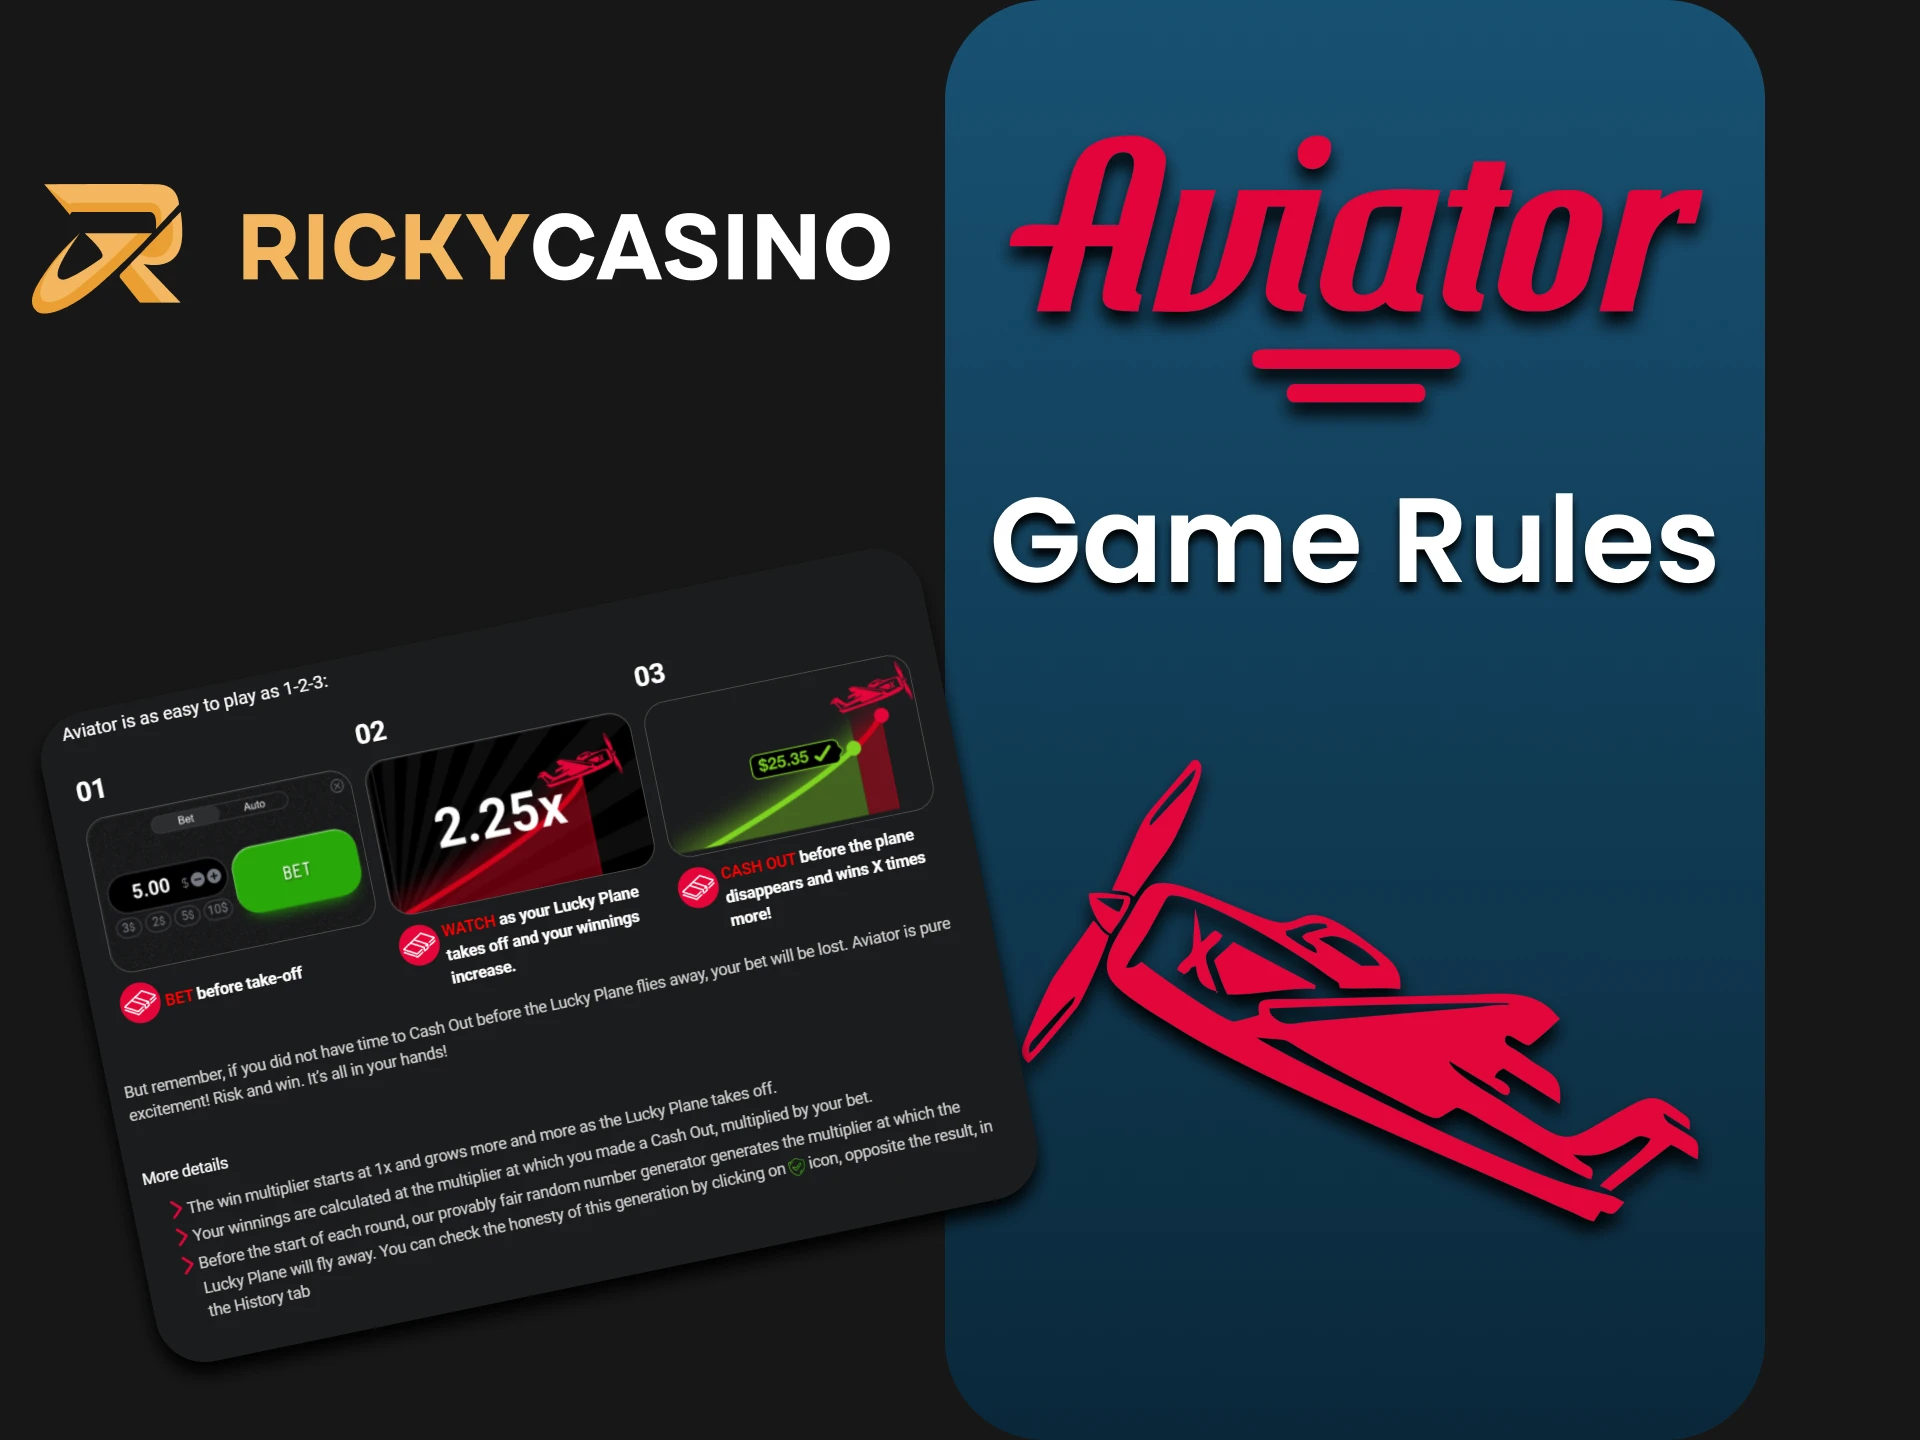 Learn the rules of the Aviator game to win at Ricky Casino.